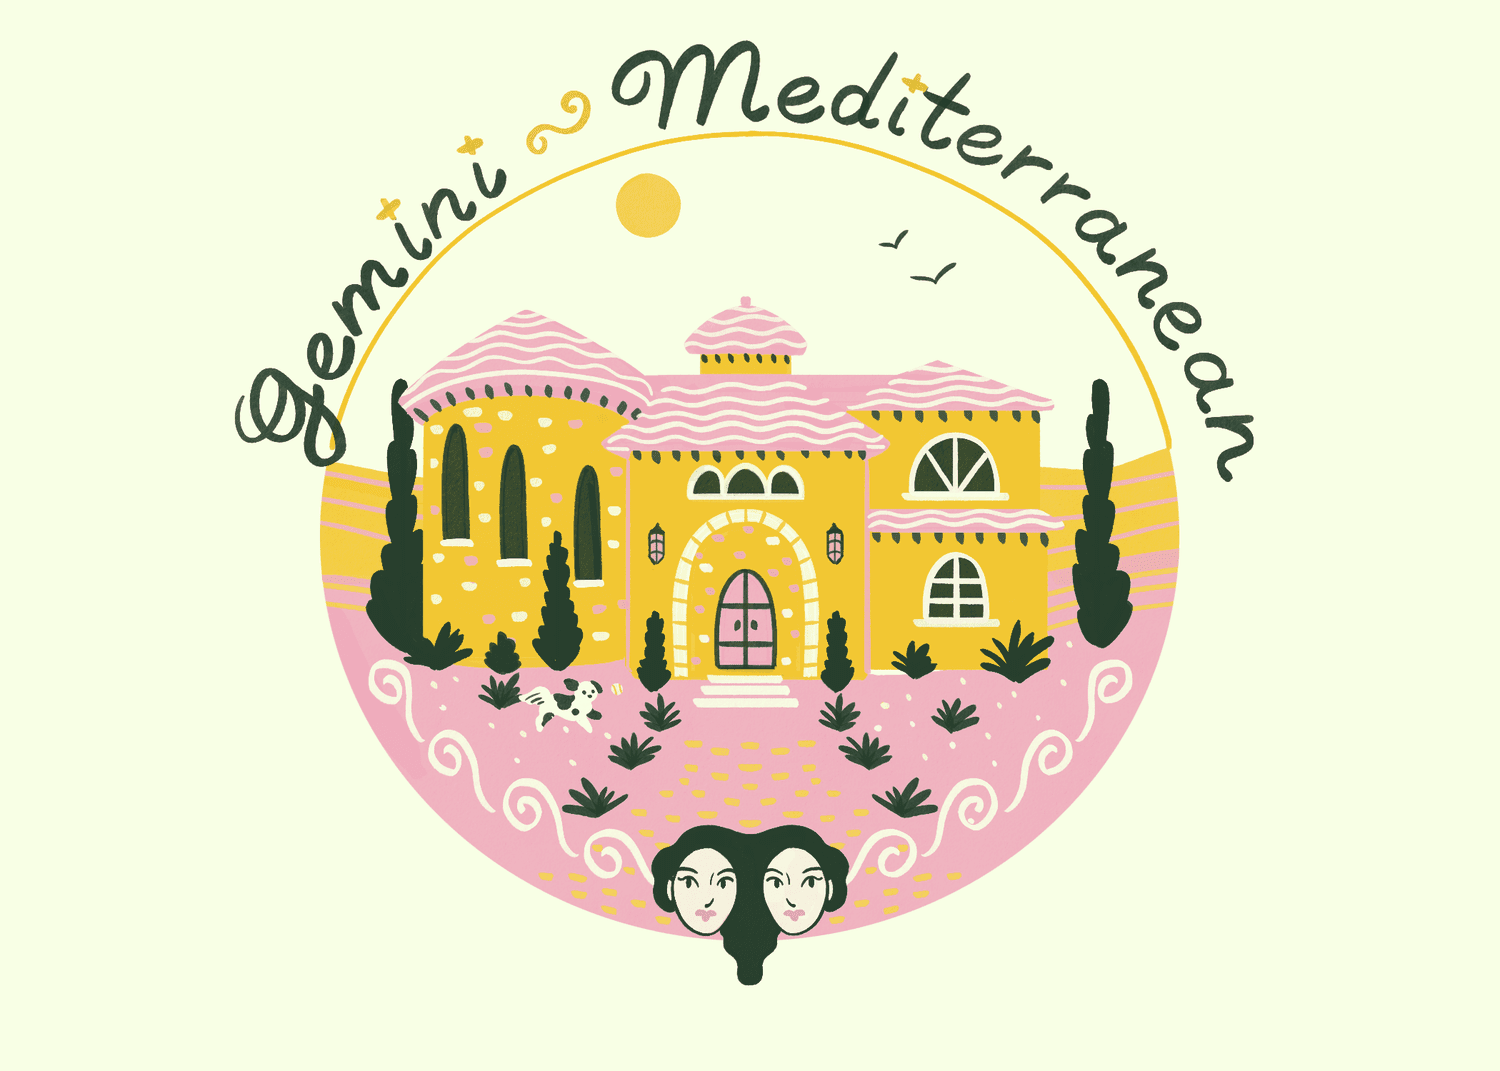 An illustration of a mediterranean home for a gemini